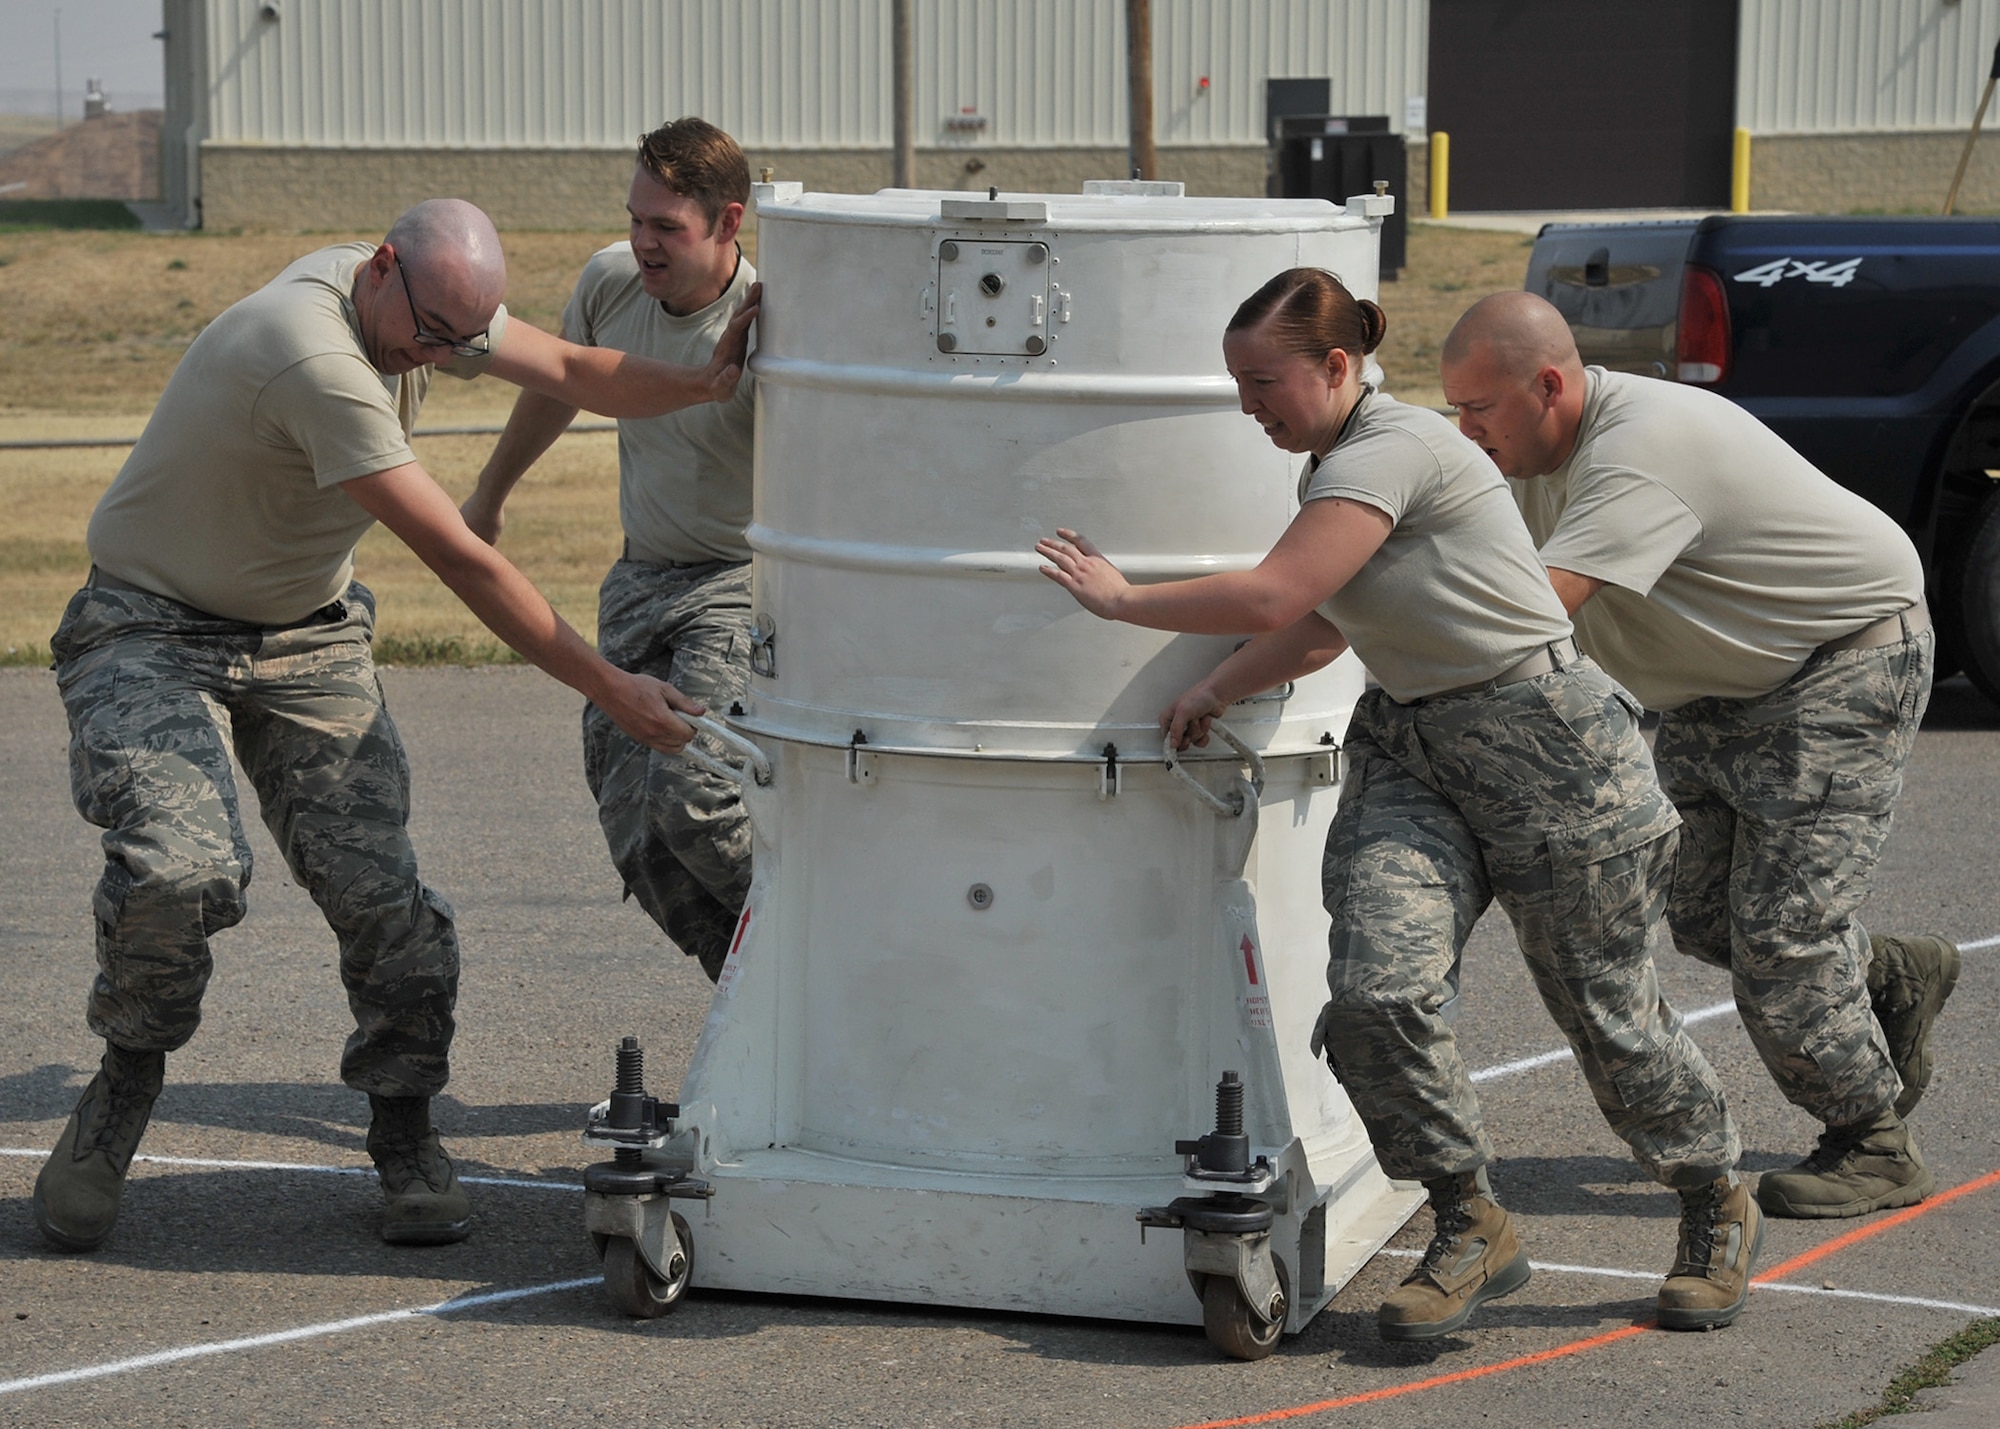 Senior Airman Matthew Gish, Staff Sgt. Aaron Hayworth, Senior Airman Megan Dees, and Tech. Sgt. Robert DeMarino, all from the 341st Munitions Squadron, scramble to move an empty warhead storage container through a serpentine course Aug. 25, 2015, at the Malmstrom Air Force Base, Mont., weapons storage area. Malmstrom’s Global Strike Challenge 2015 MUNS team was practicing for a ‘handling rodeo,’ a timed event in Air Force Global Strike Command’s ICBM maintenance competition and one of three events that the 341st Missile Wing’s GSC 2015 MUNS team will compete in Sept. 2-4. The results will be revealed in October and compared to similar teams from Minot AFB, N.D., and F.E. Warren AFB, Wyo. (U.S. Air Force photo/John Turner)